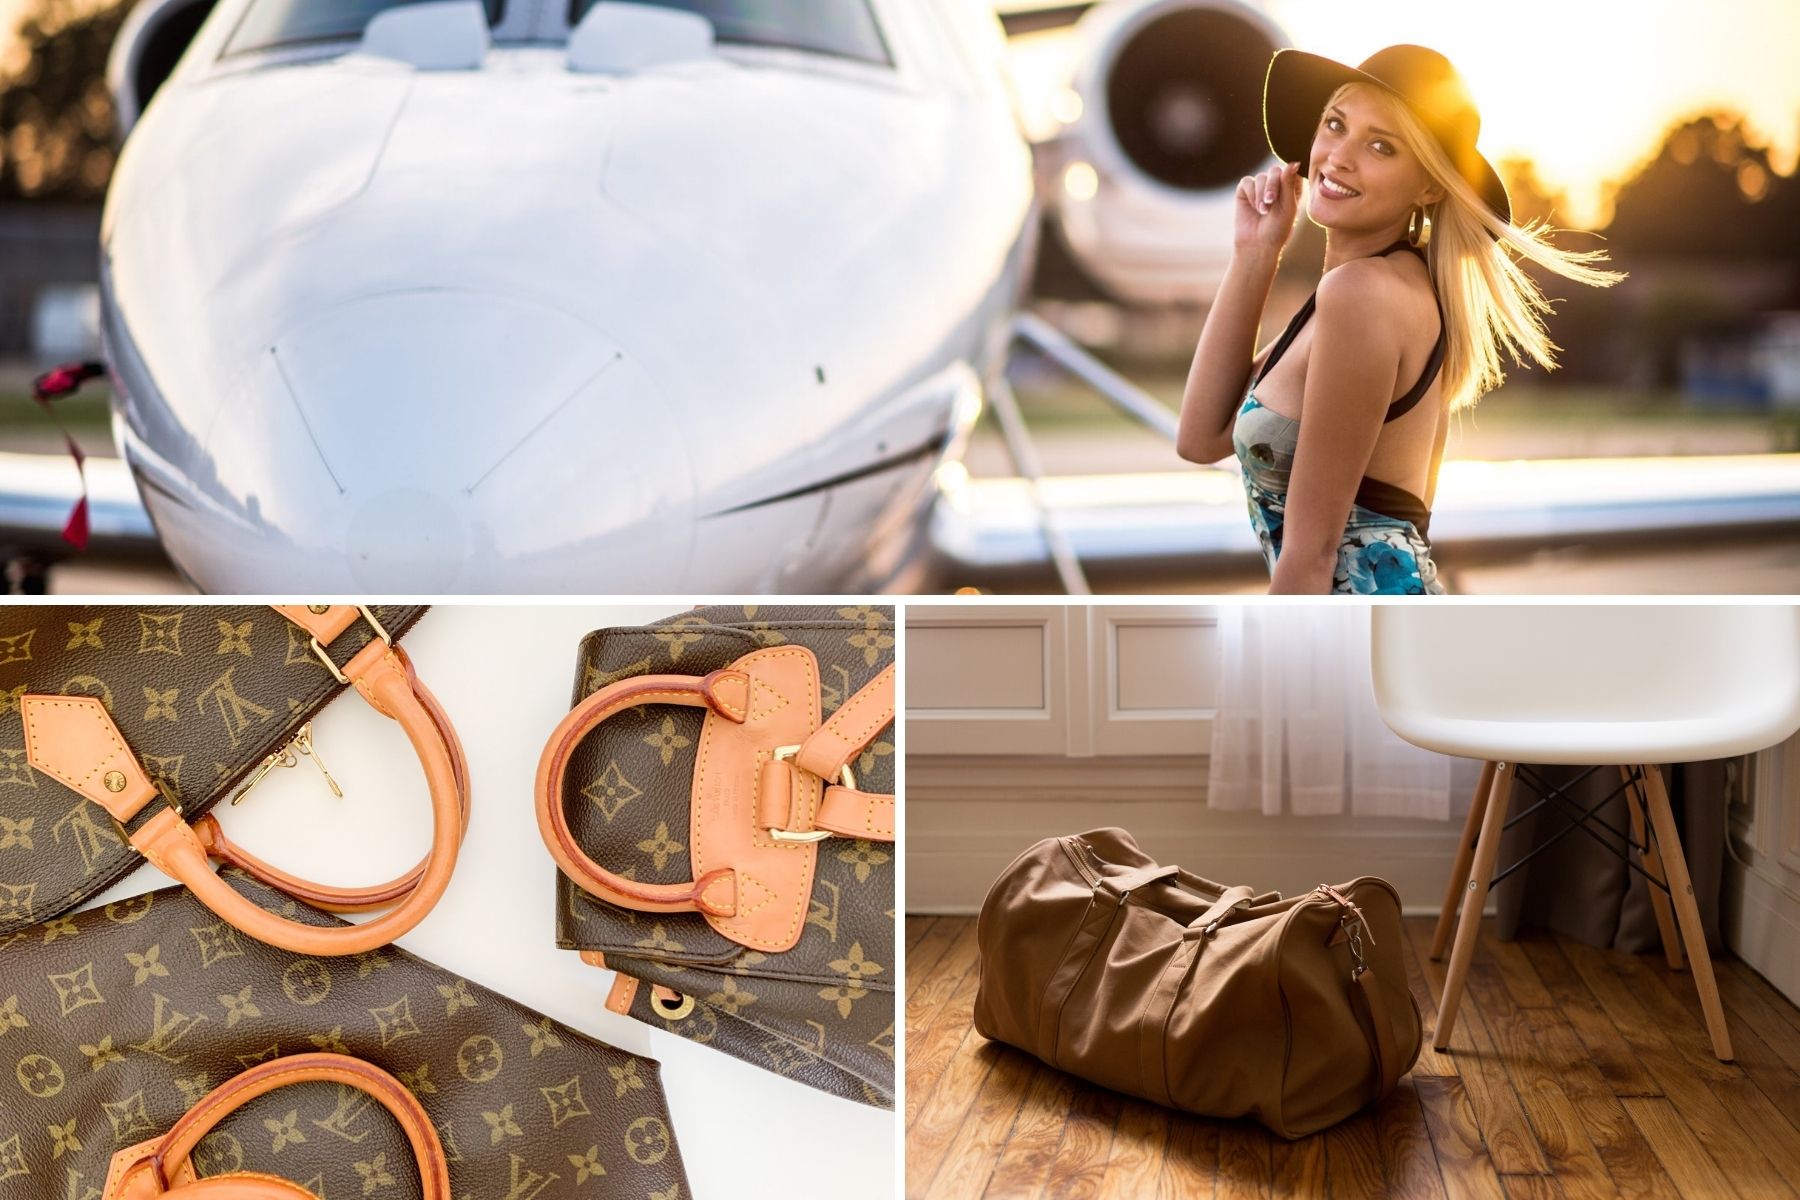 Travel Essentials Private Flight, Tips and Tricks